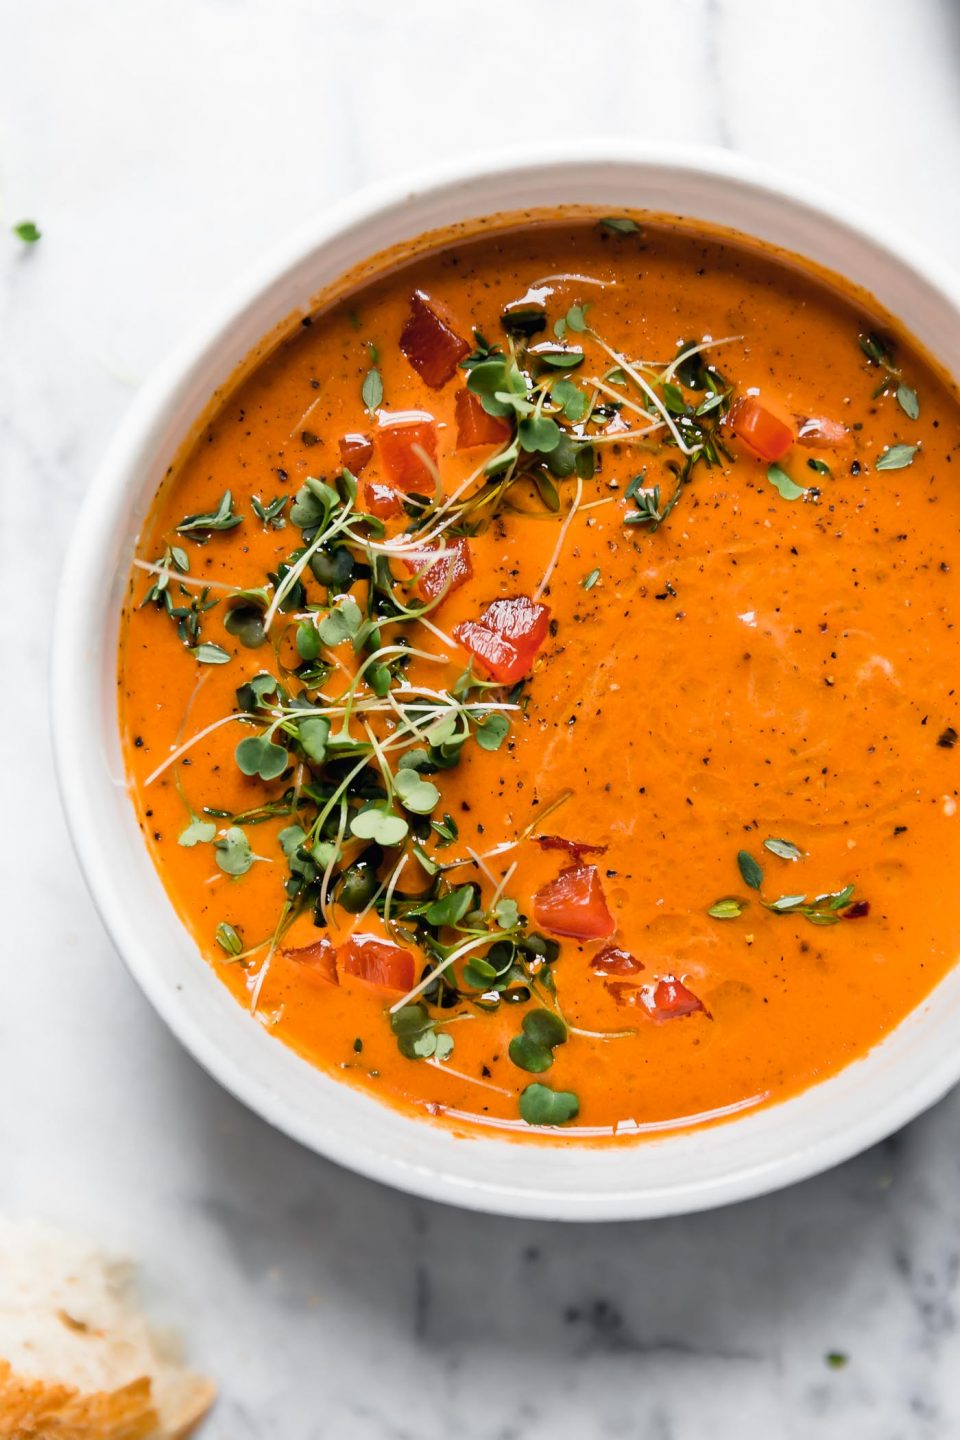 Creamy Roasted Red Pepper soup in a white ceramic bowl, topped with microgreens and cracked black pepper. The bowl is surrounded by some pieces of crusty bread, and a second bowl of soup. They are sitting atop a white marble surface.